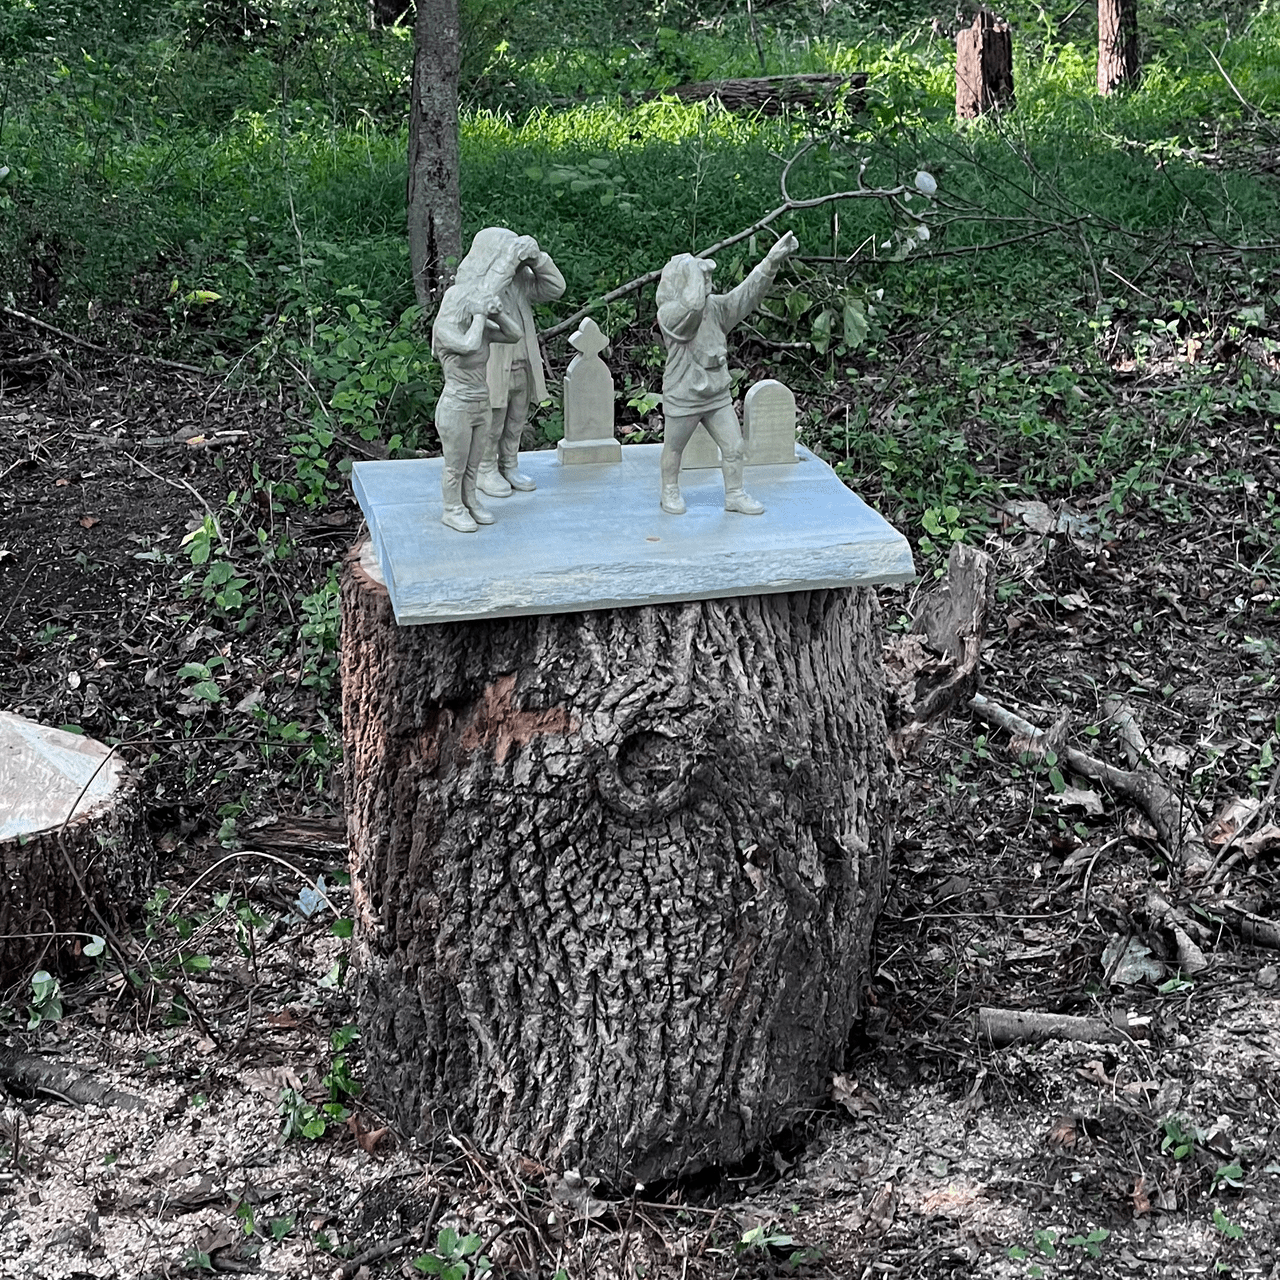 A picture of a sculpture consisting of three birdwatchers in a graveyard setting, resting on a tree stump.